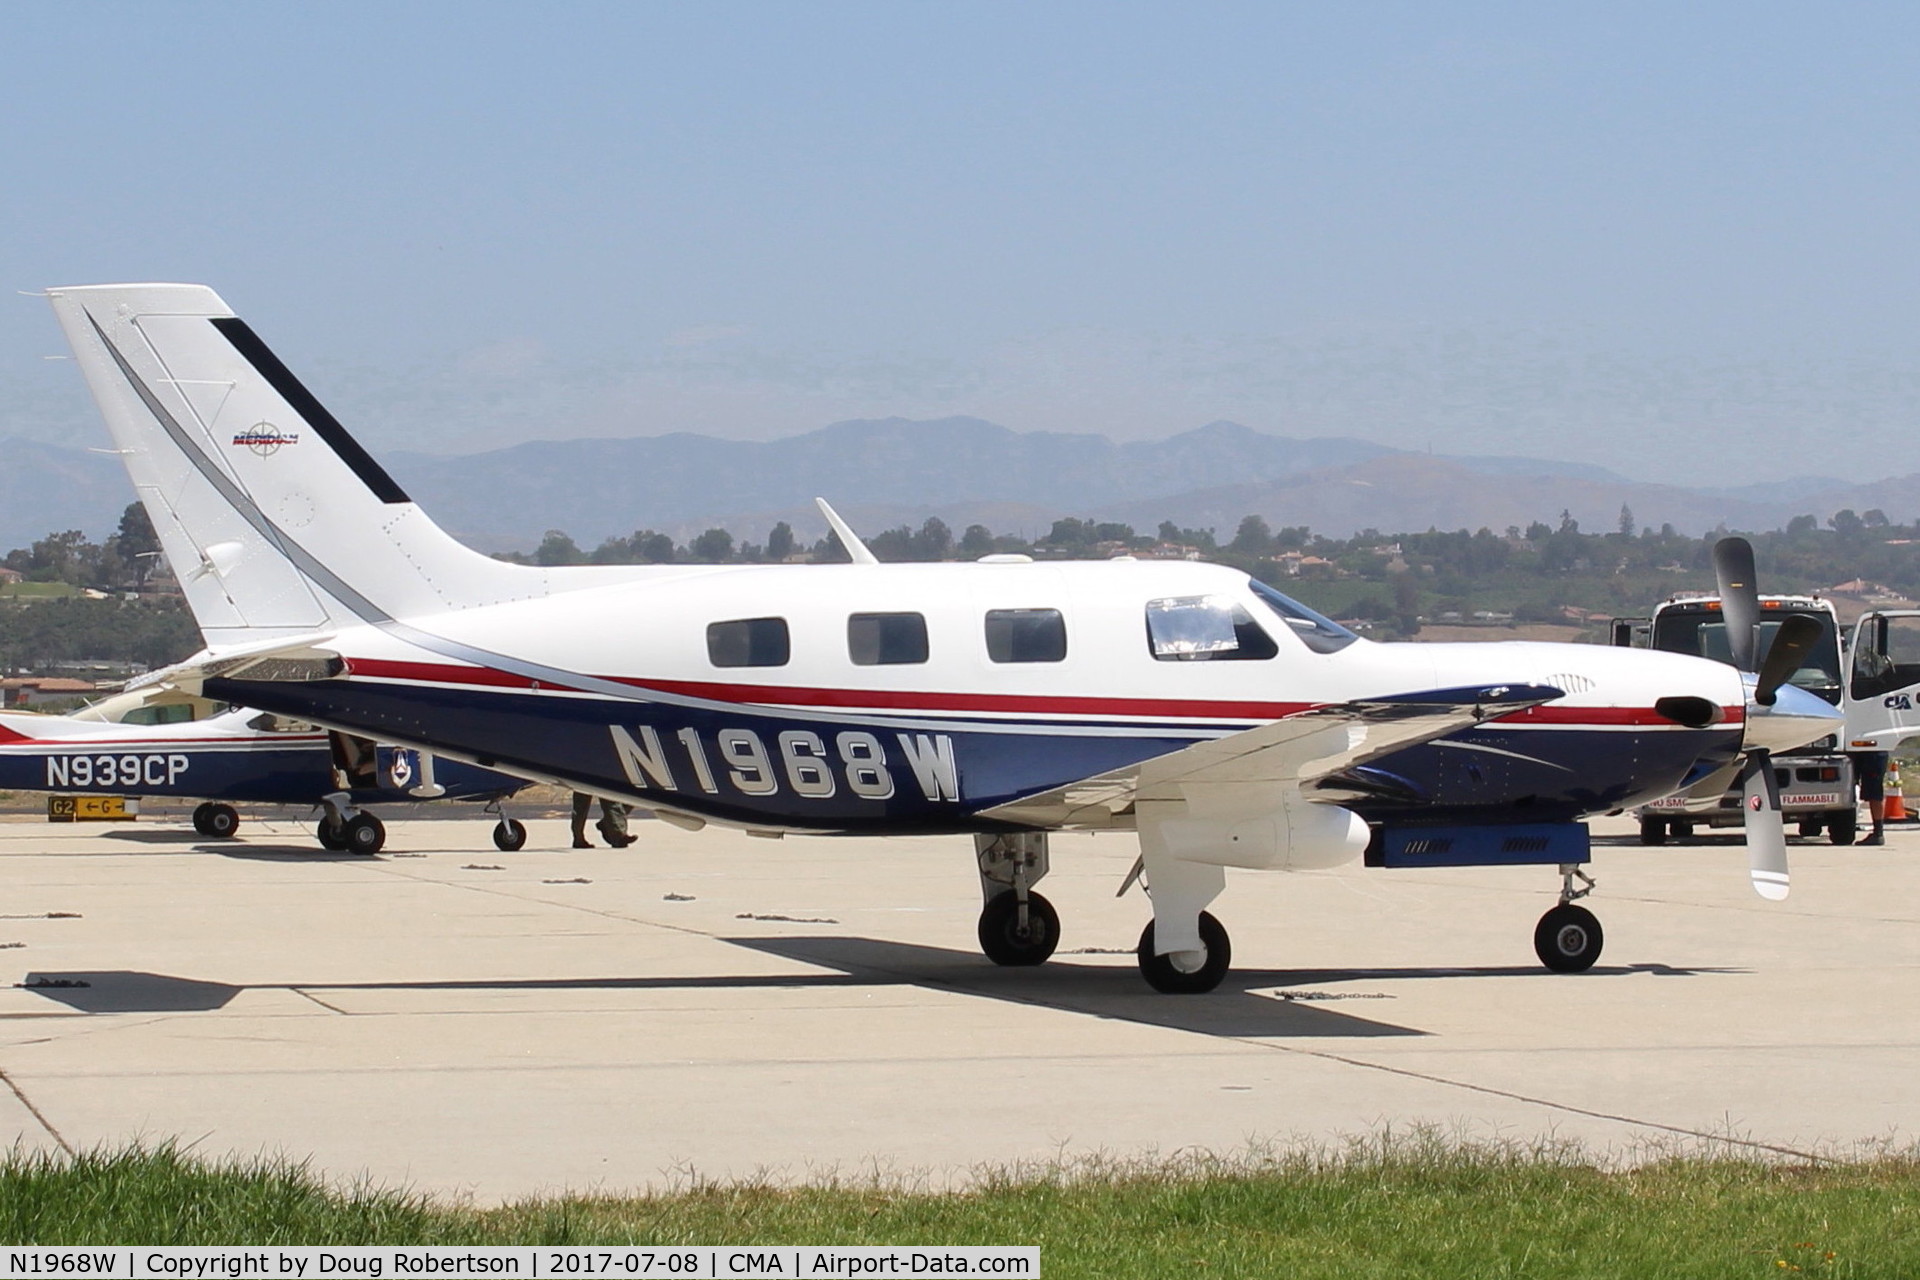 N1968W, 2001 Piper PA-46-500TP C/N 4697115, 2001 Piper PA-46-500TP MALIBU MERIDIAN, one P&W(C)PT6A-42A Turboprop derated to 500 sHp for takeoff, 6 seats